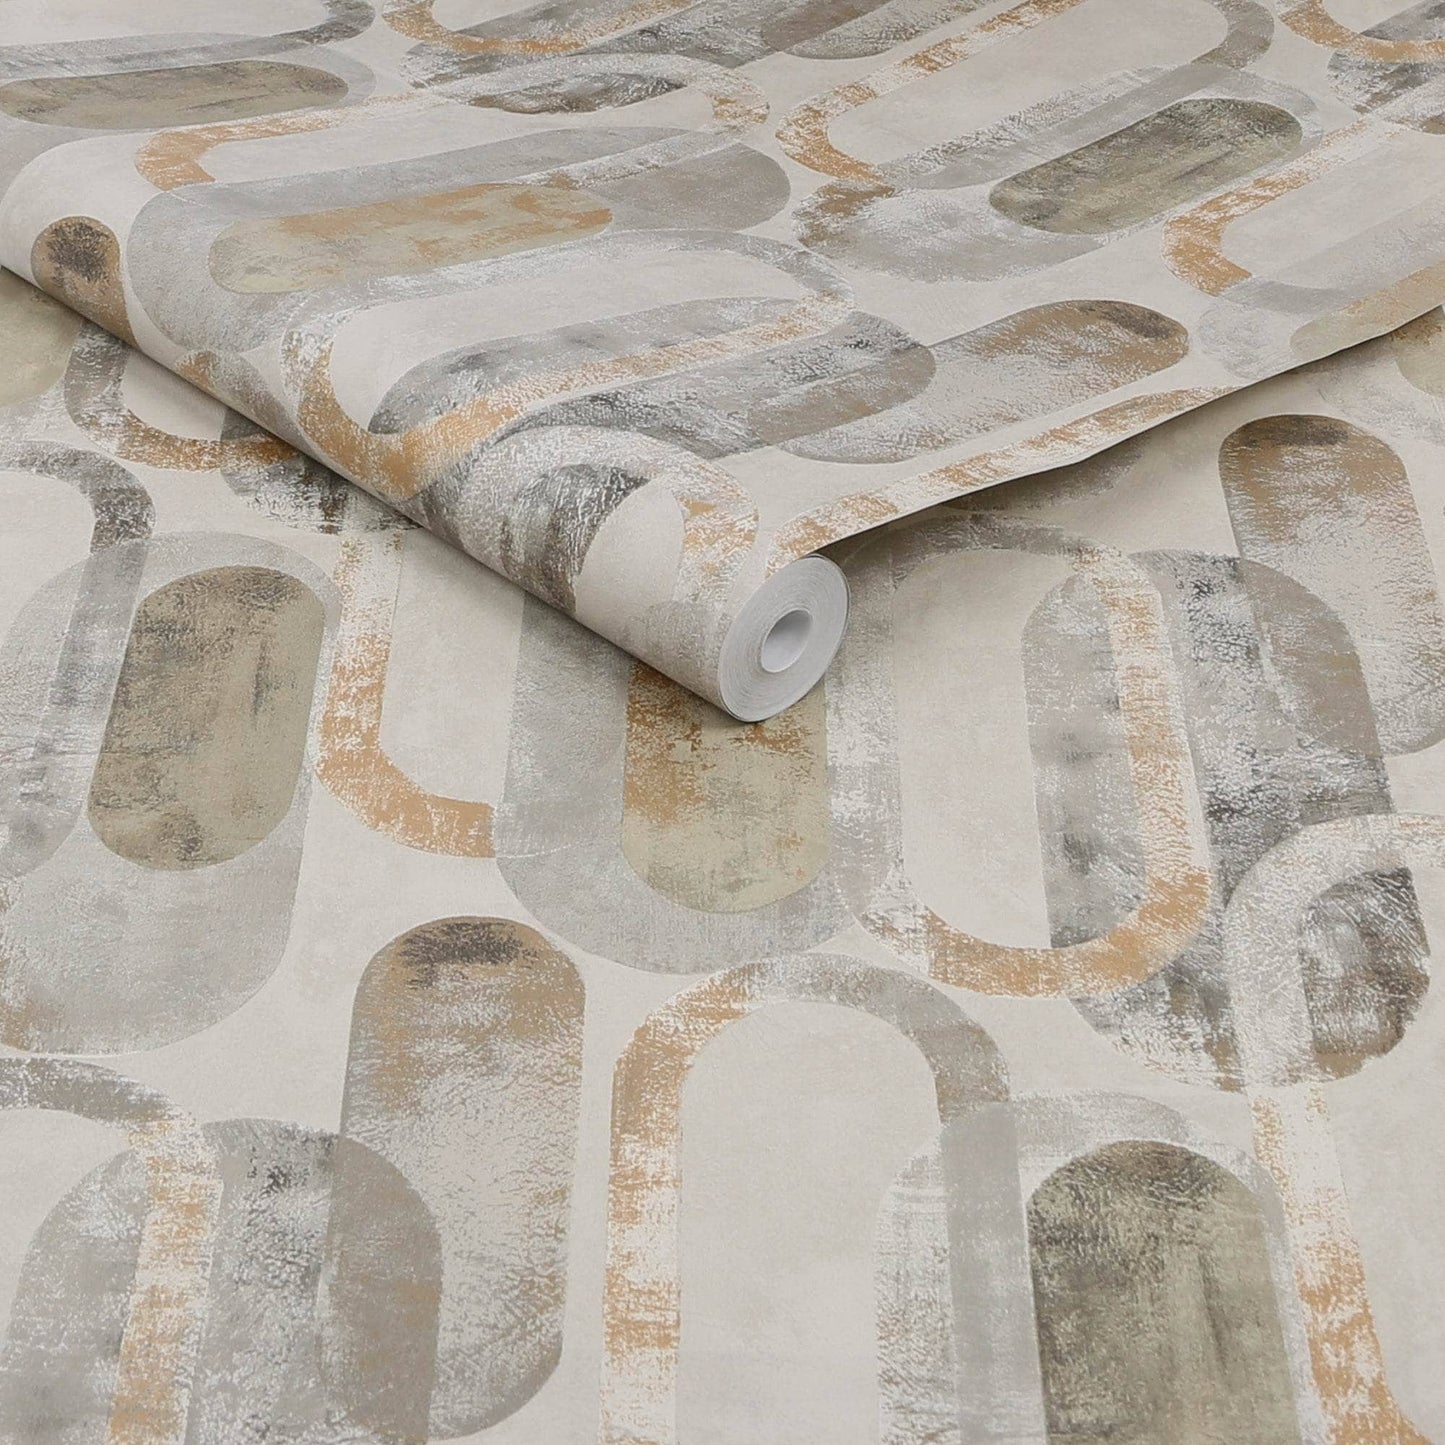 Wallpaper -  G&B Sublime Oval Shapes Sand & Grey - 121137  -  60009412